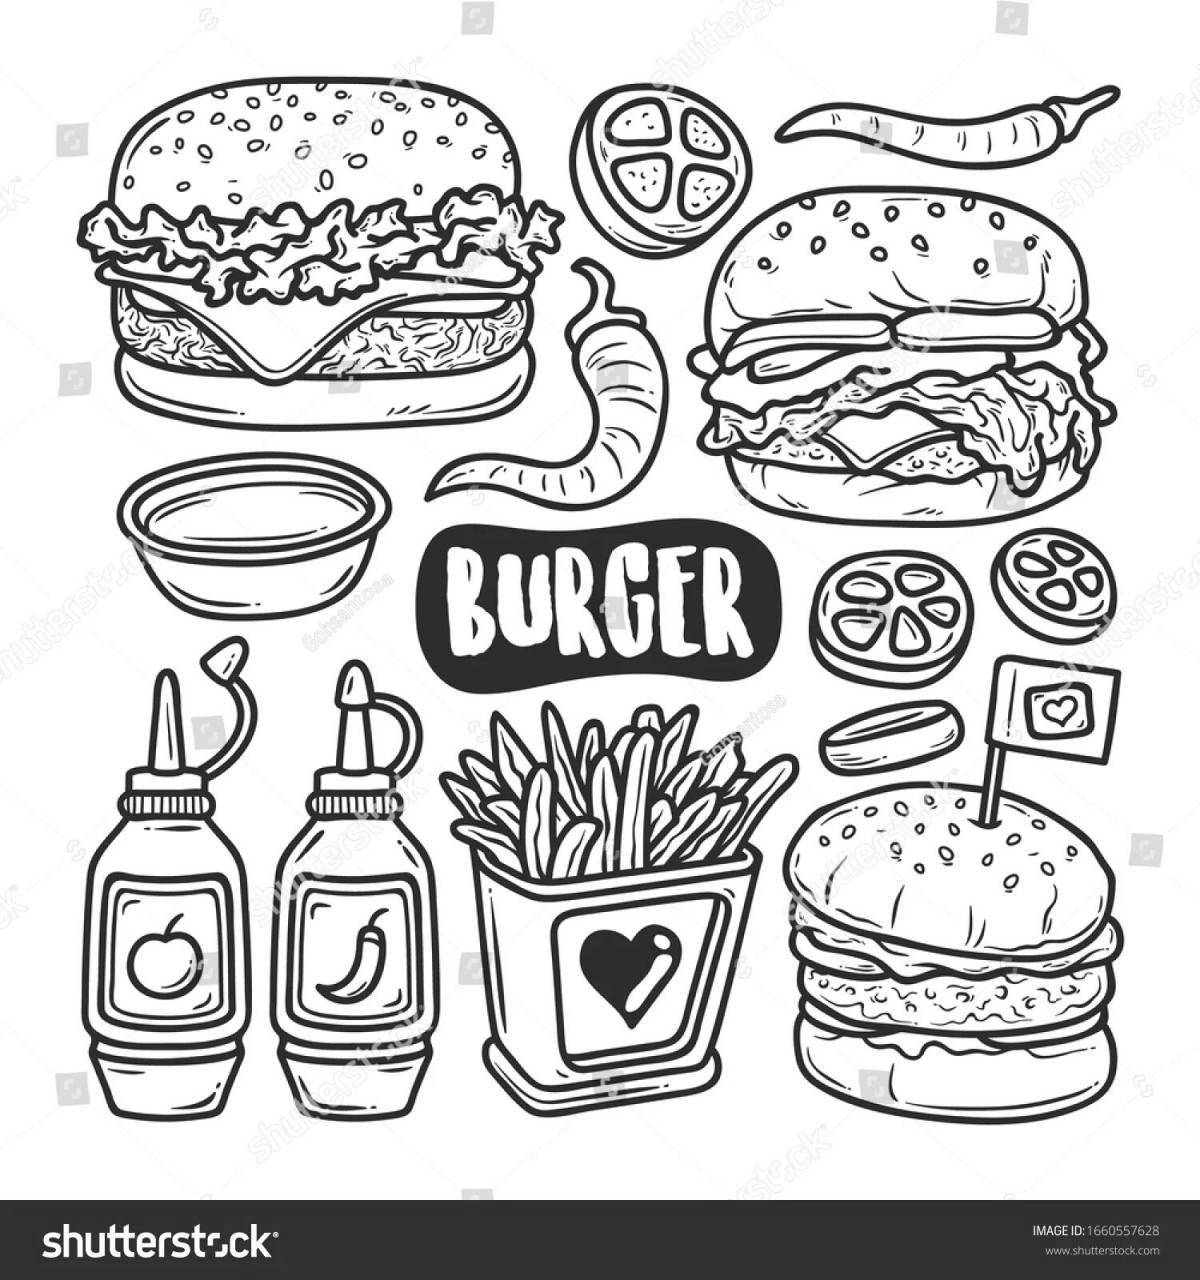 Mcdonald's food coloring page